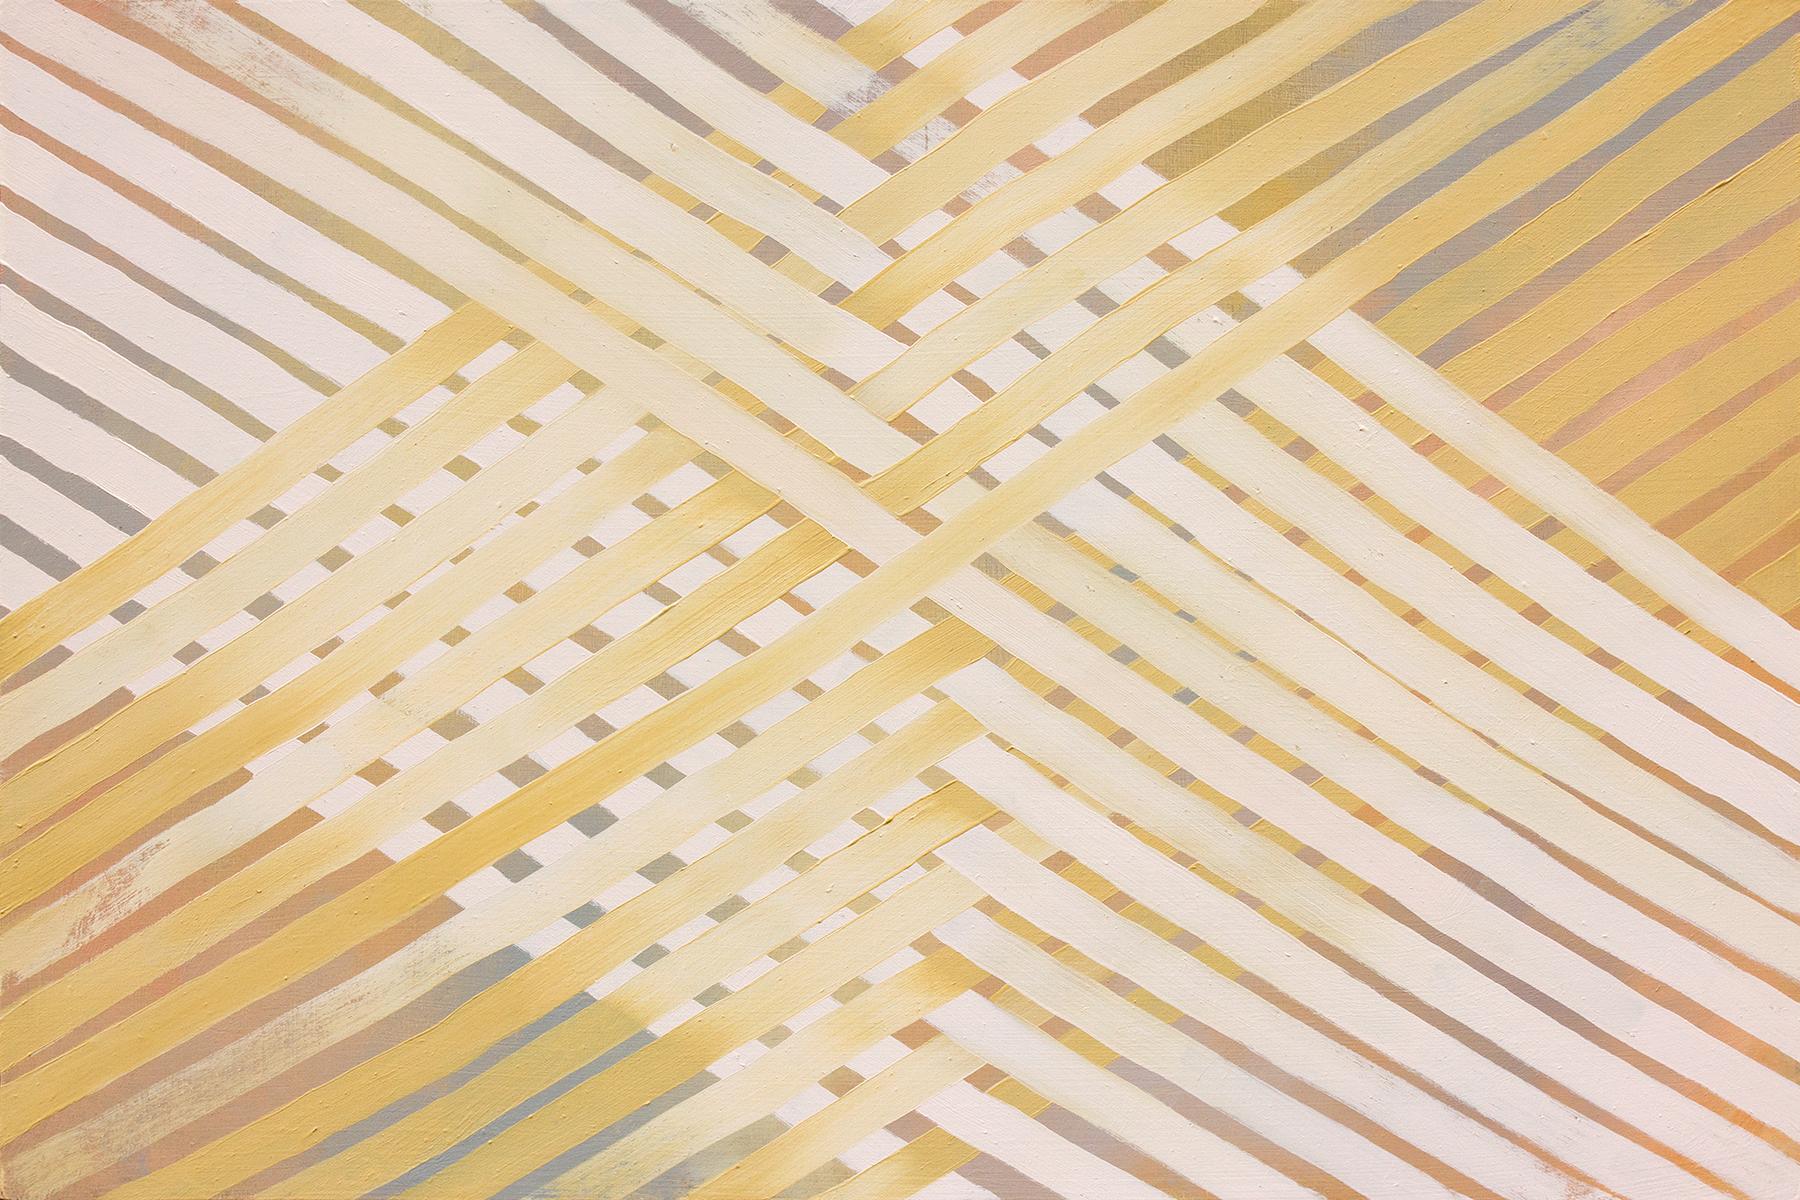 "Arise" is a geometric abstract painting featuring hues of ocher, pink, and blue. 
Amanda Brazer creates handmade oil paints from locally harvested earth pigments. She is inspired by the work of Agnes Martin and Anni Albers.

Chattanooga-based